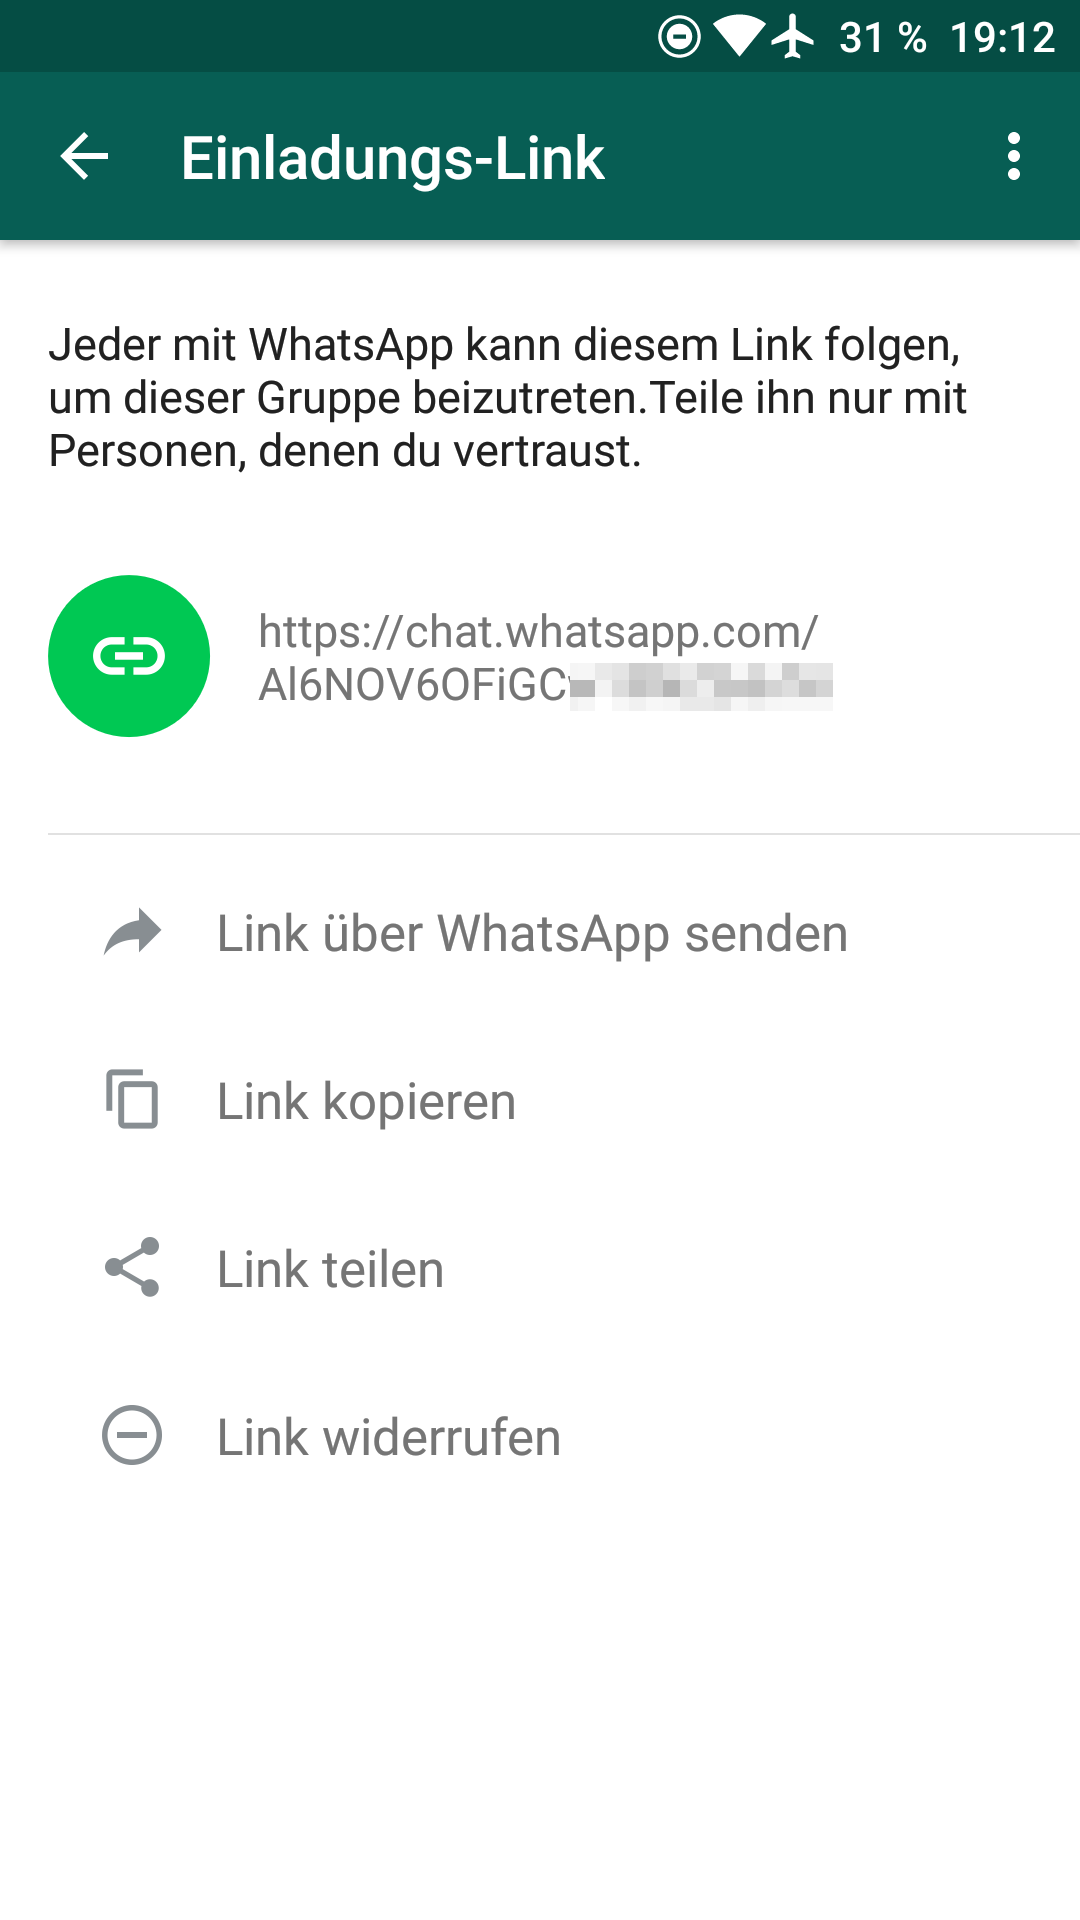 A link can be used to add users to groups. (Picture: TechnikNews/Screenshot)